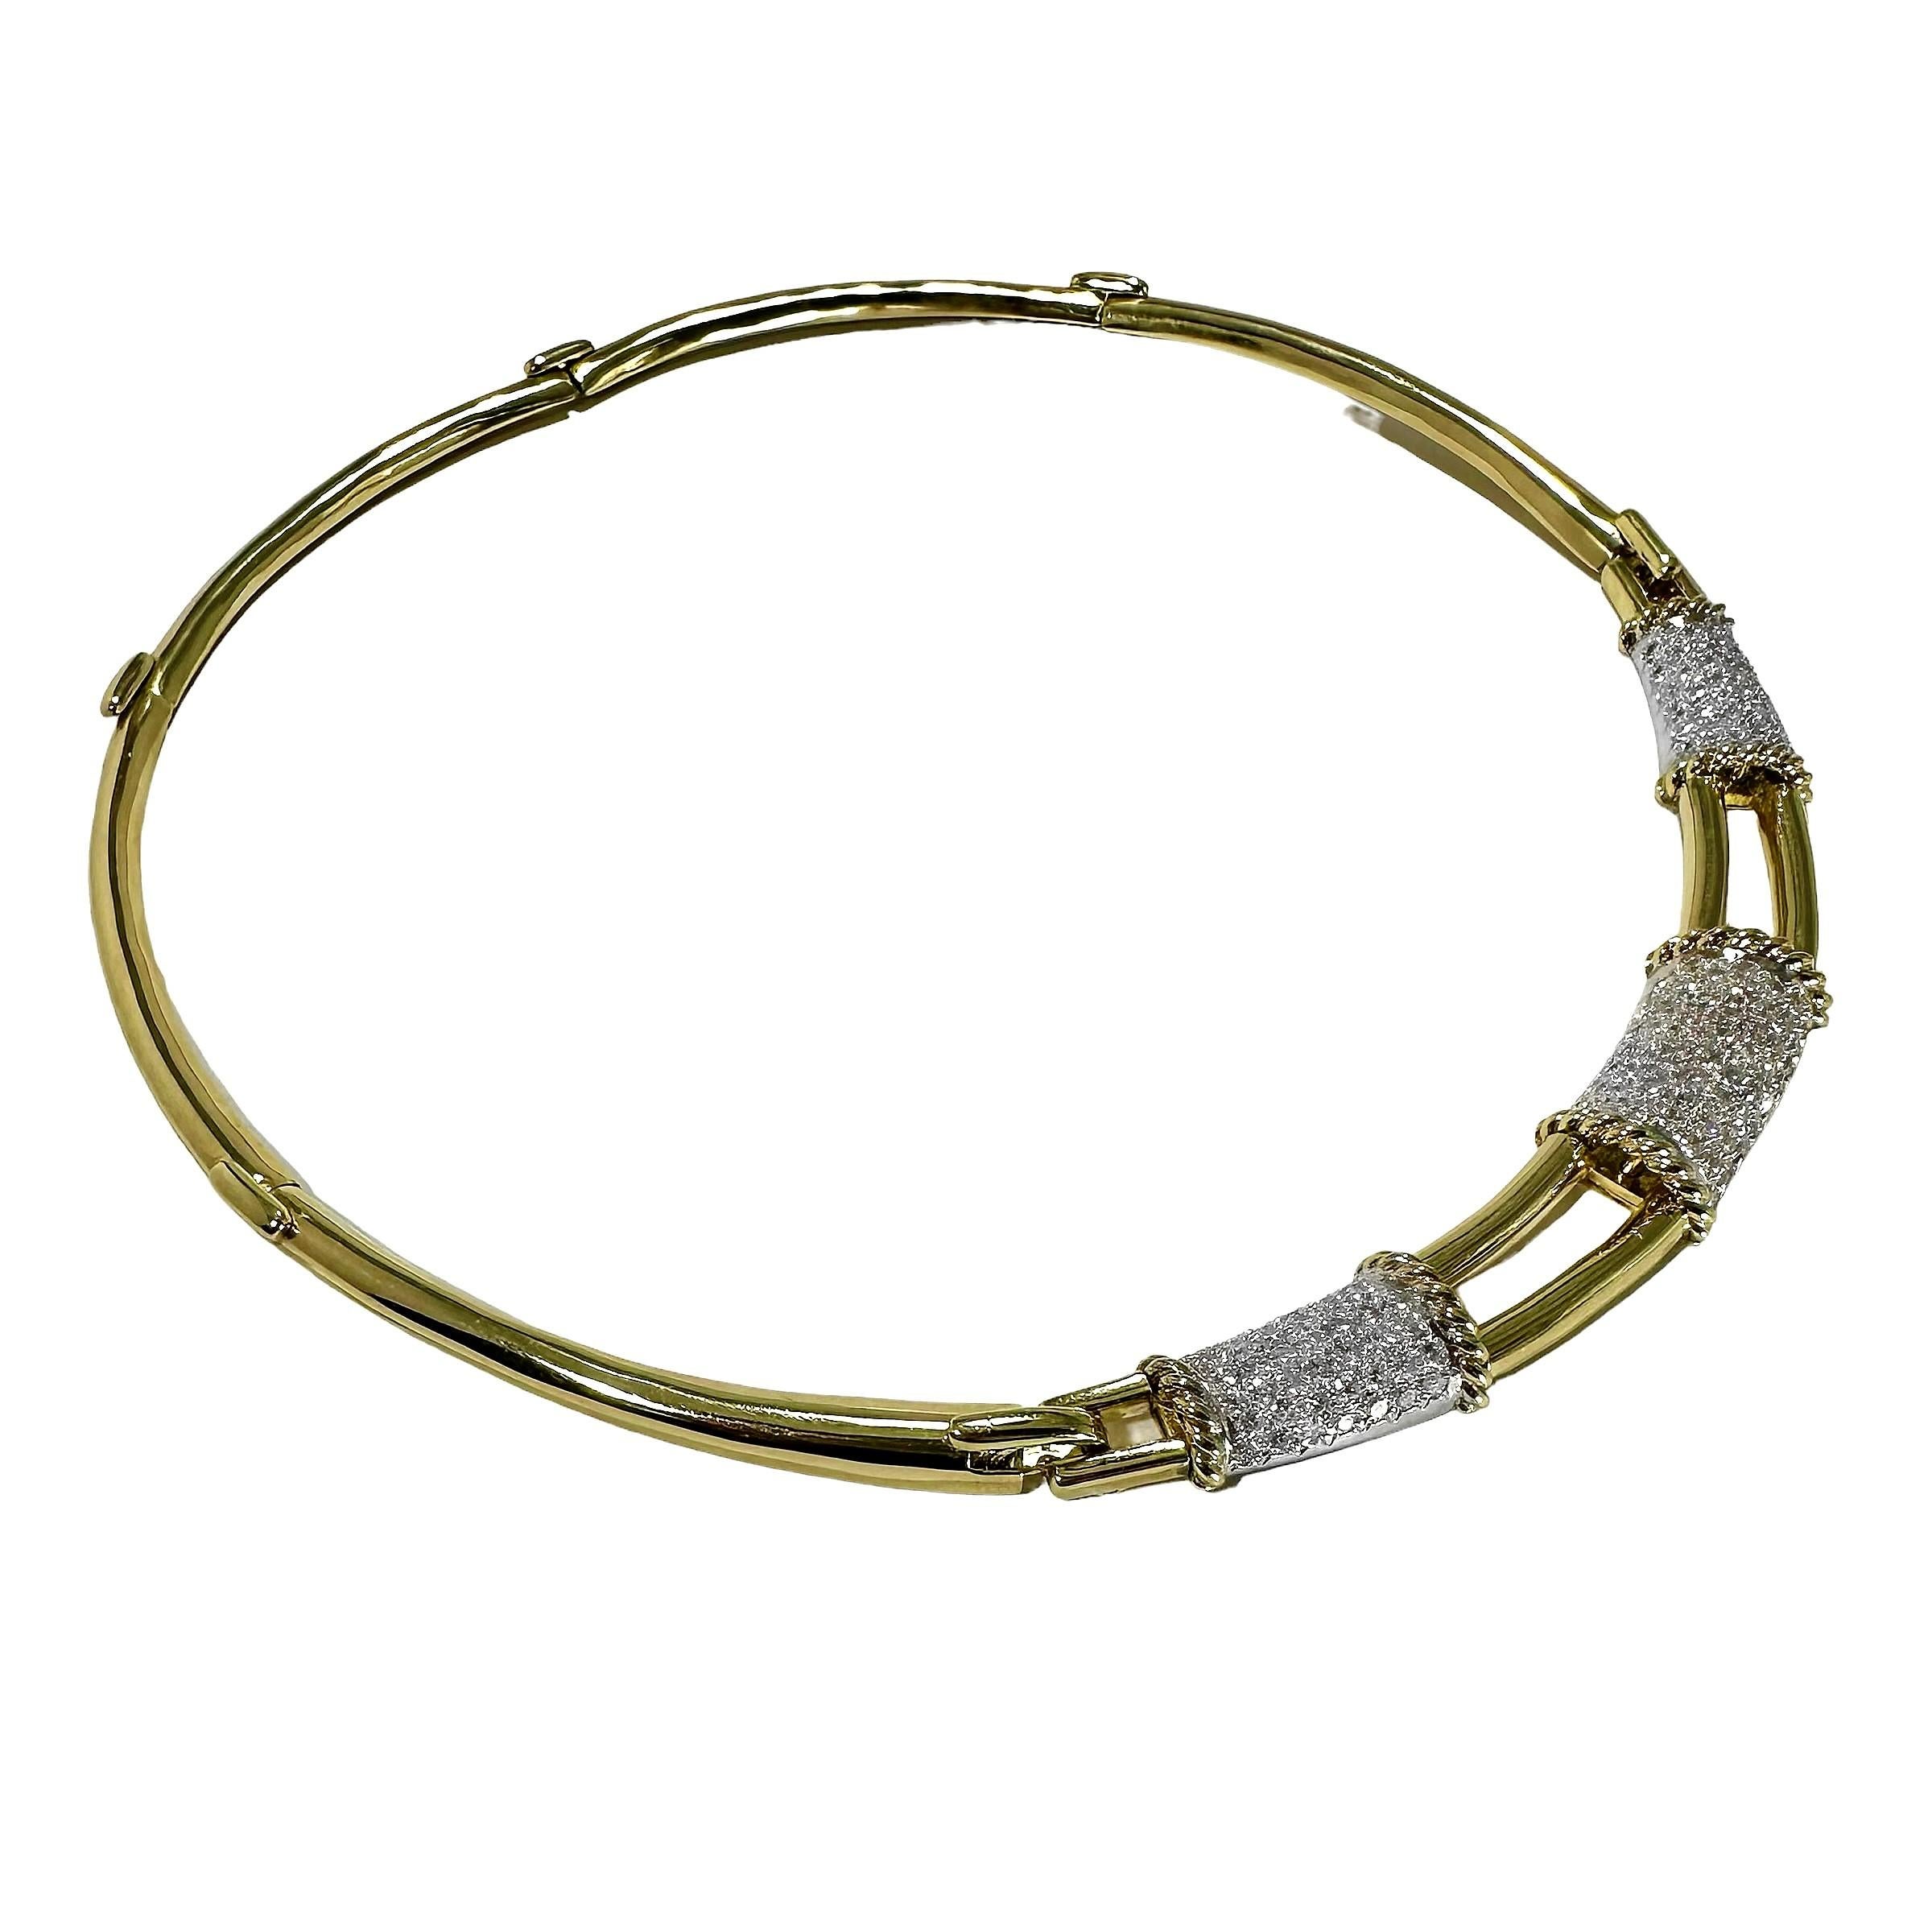 Women's Elegant Mid-20th Century 18K Gold and Diamond Choker Necklace For Sale